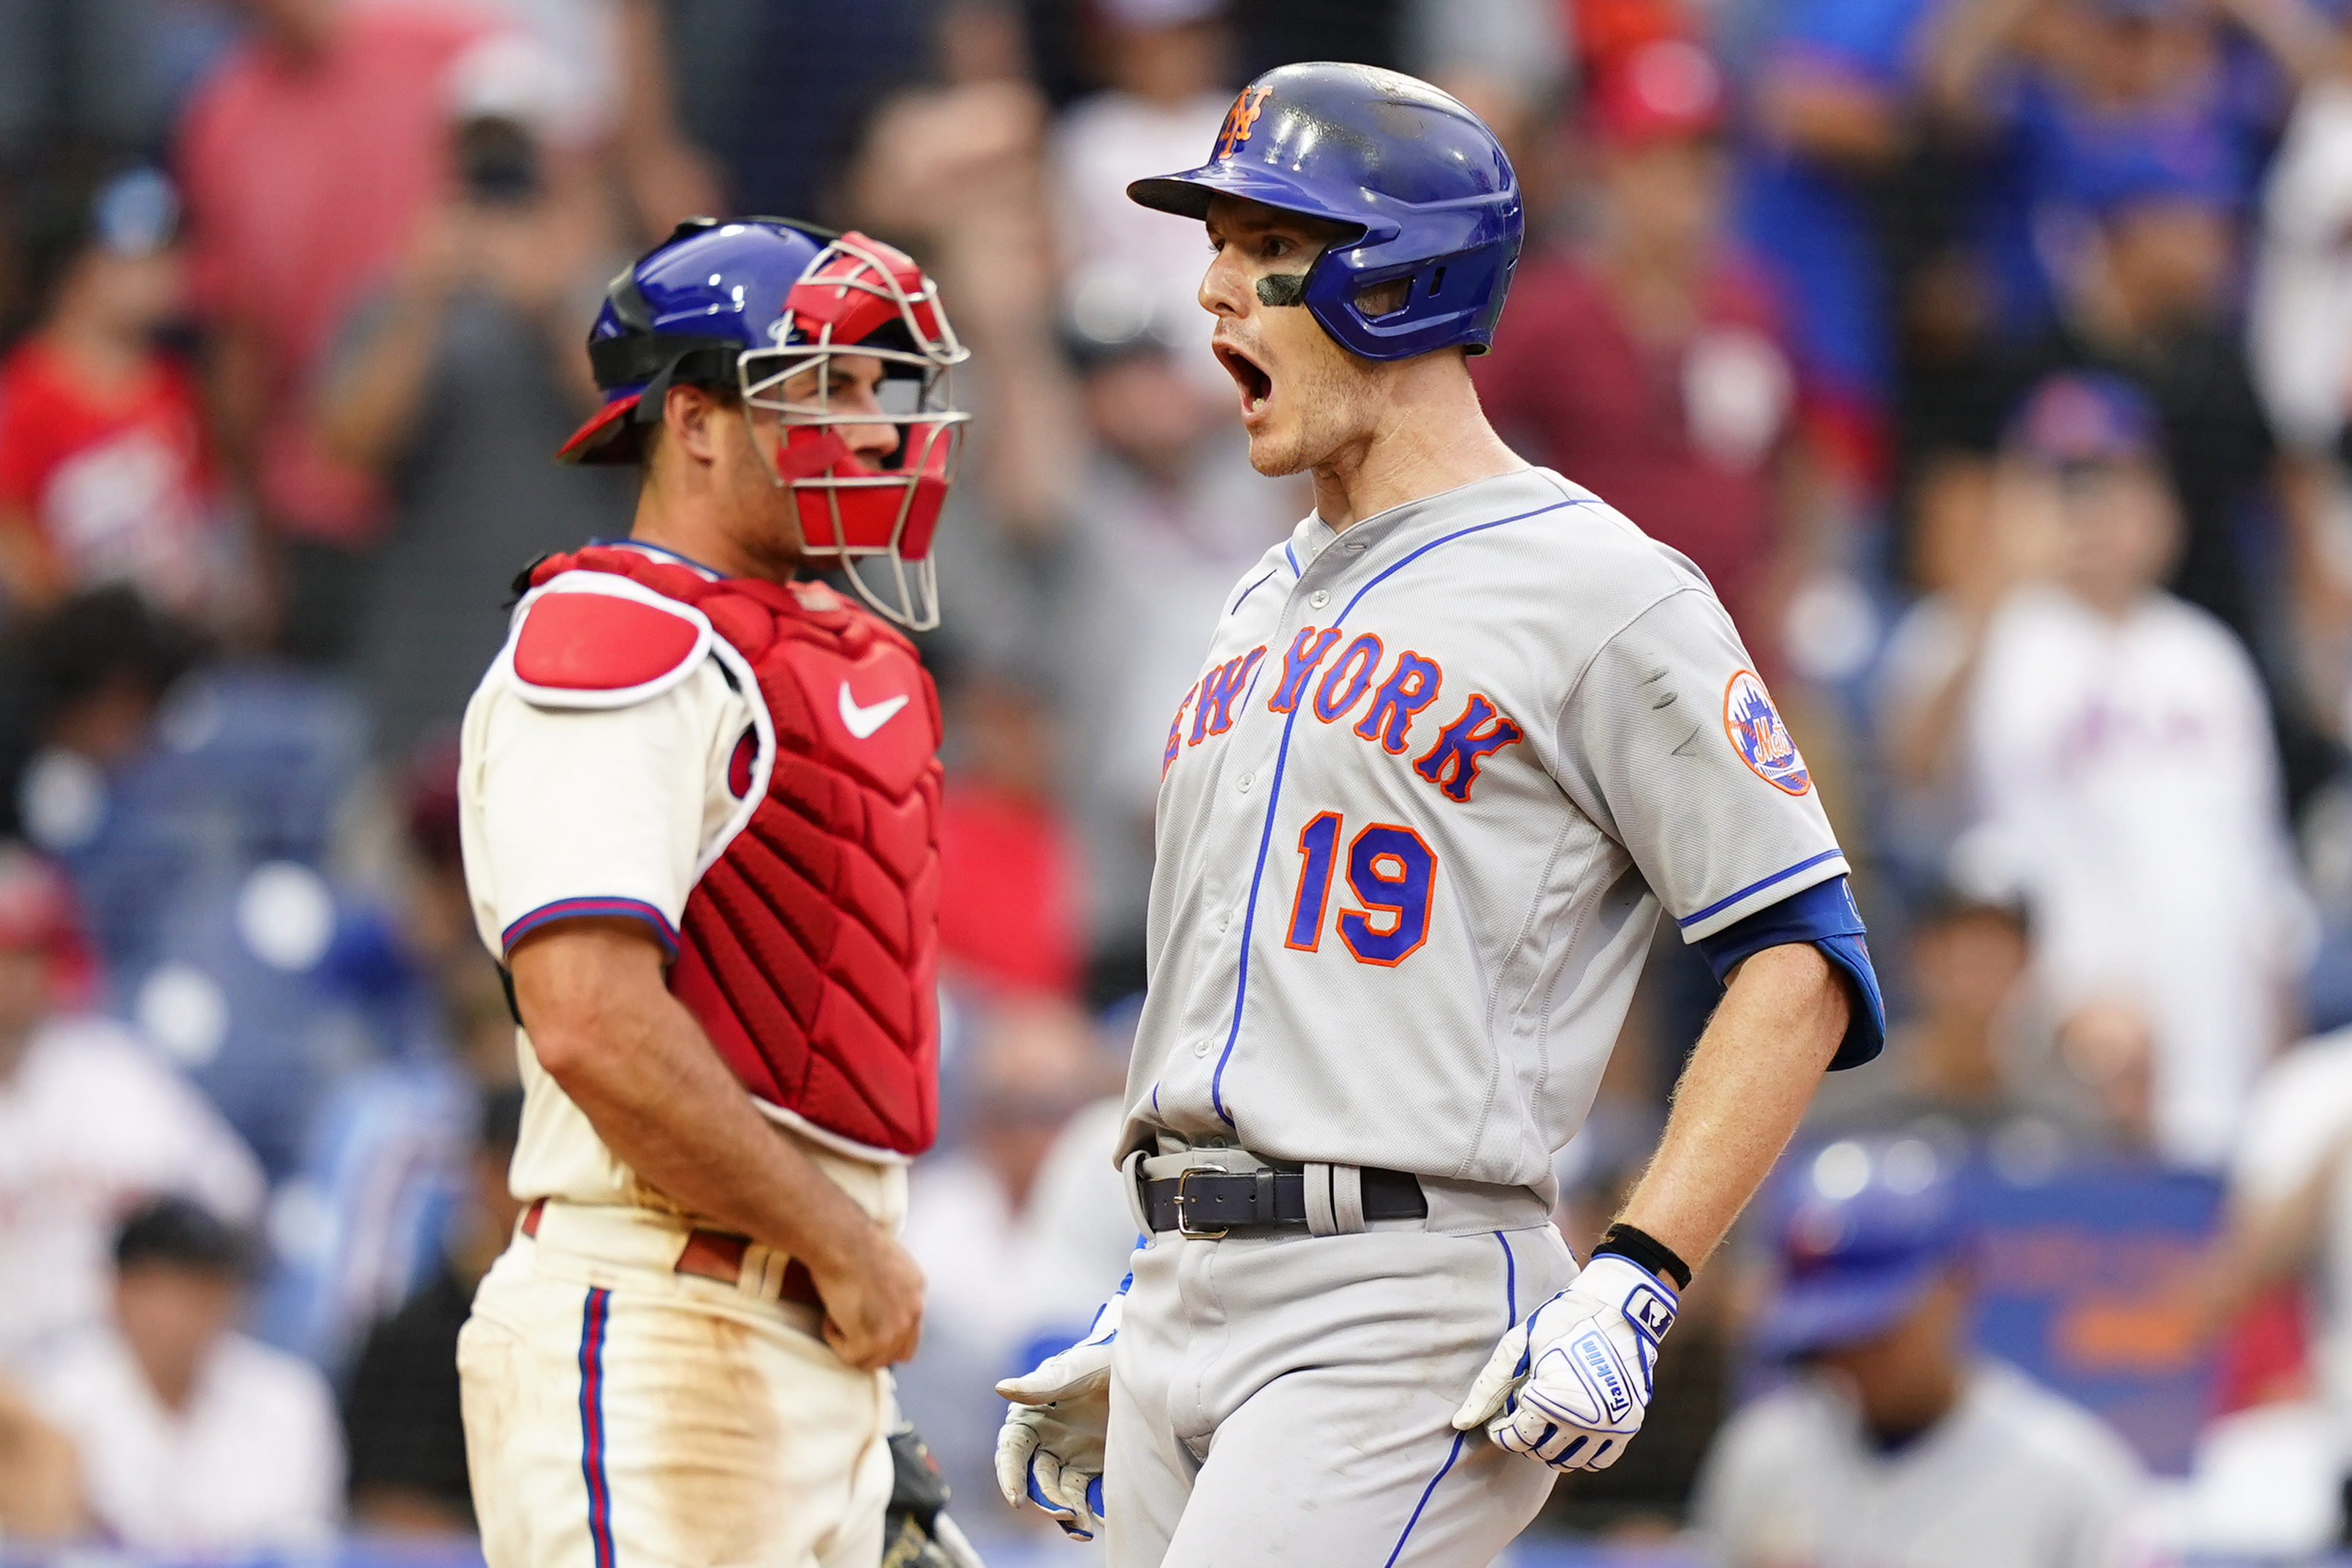 Mets blast Fishers, 14-3; Rehabbing Lawrie has two hits, Fisher Cats